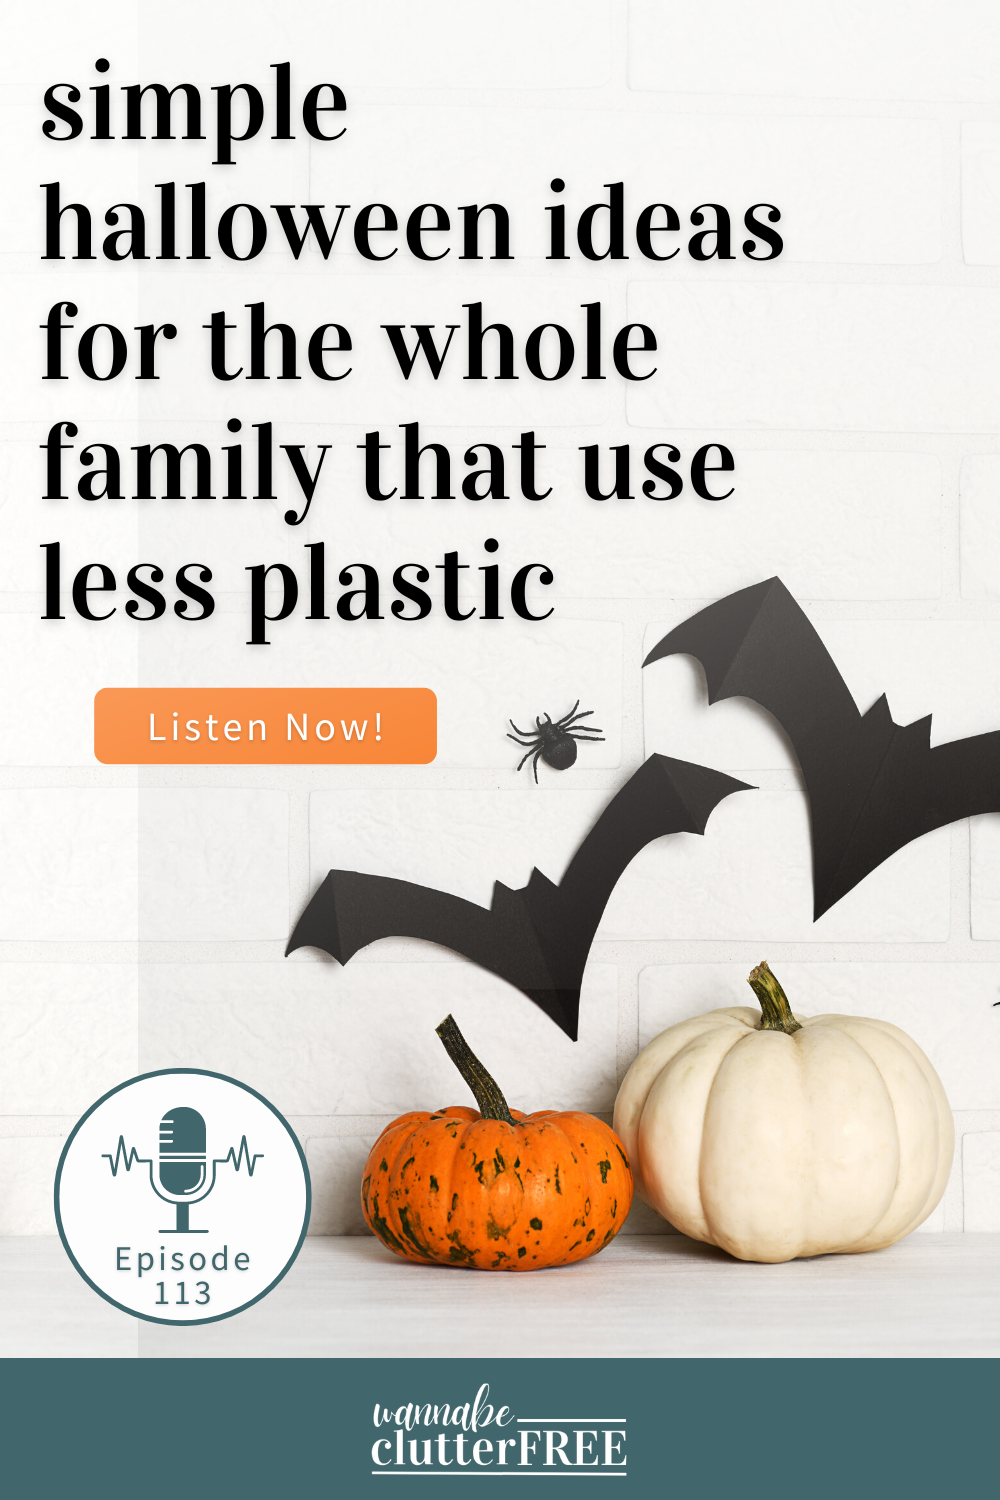 Simple Halloween Ideas for the Whole Family that Use Less Plastic